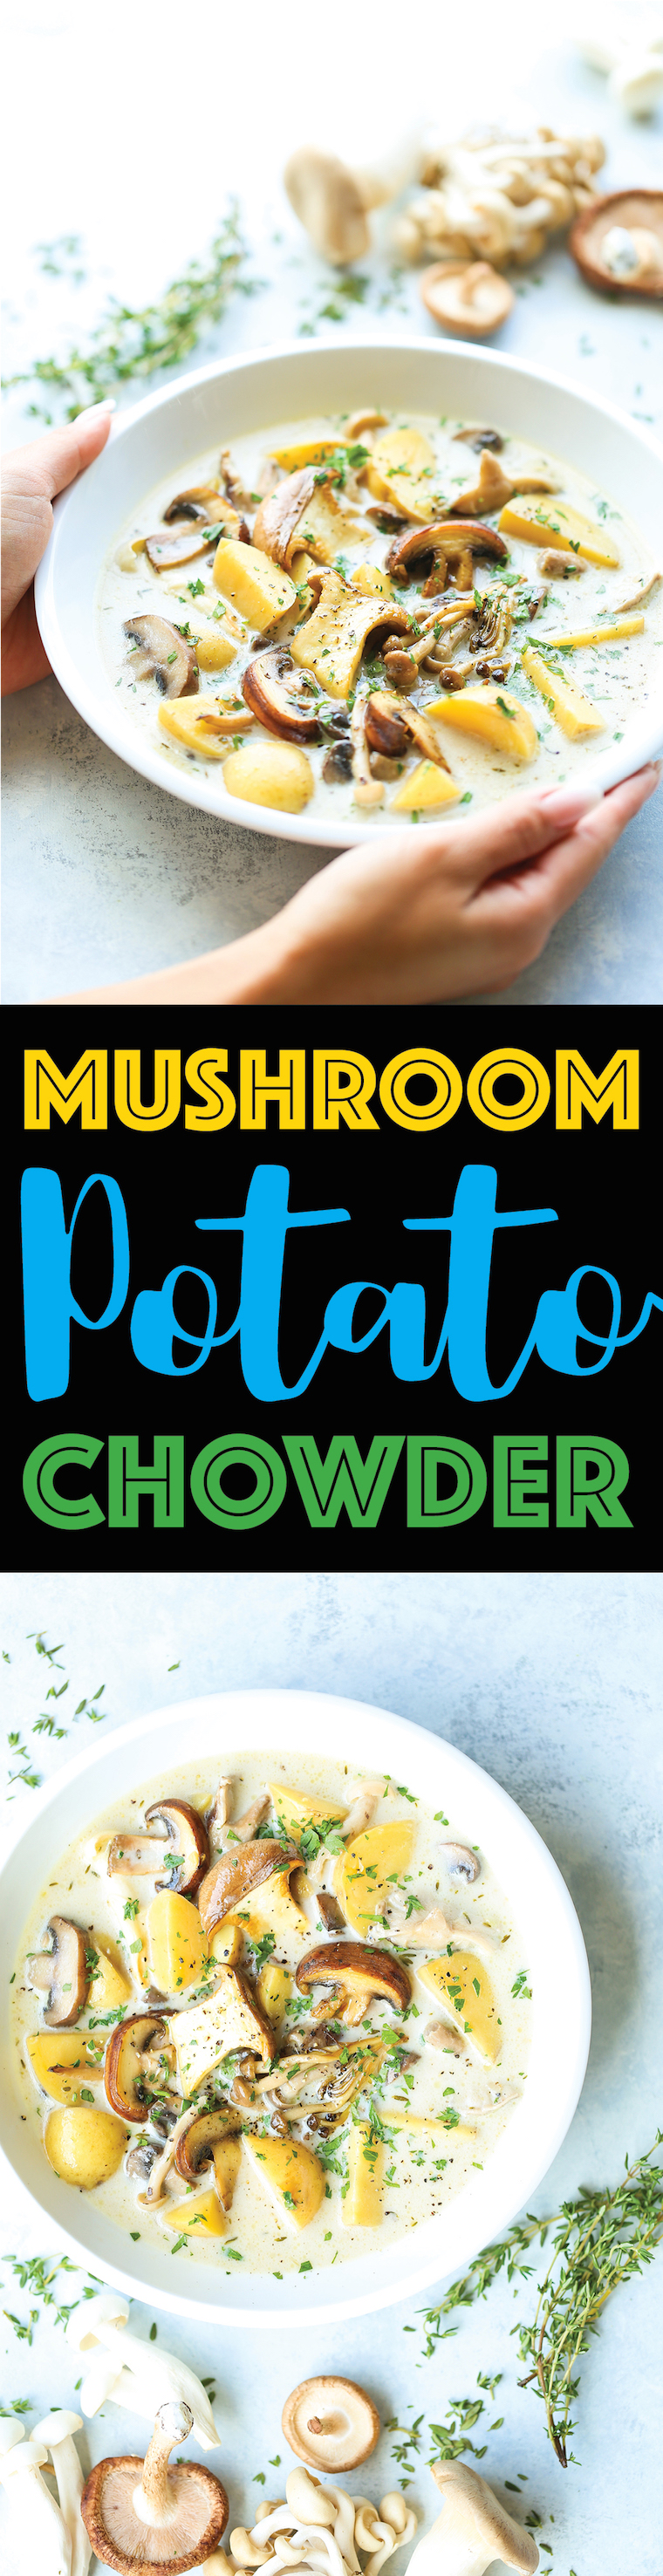 Mushroom Potato Chowder - So hearty and so creamy! This is the ultimate bowl of comfort food on a chilly night with mushrooms, potatoes, and thyme. SO GOOD!